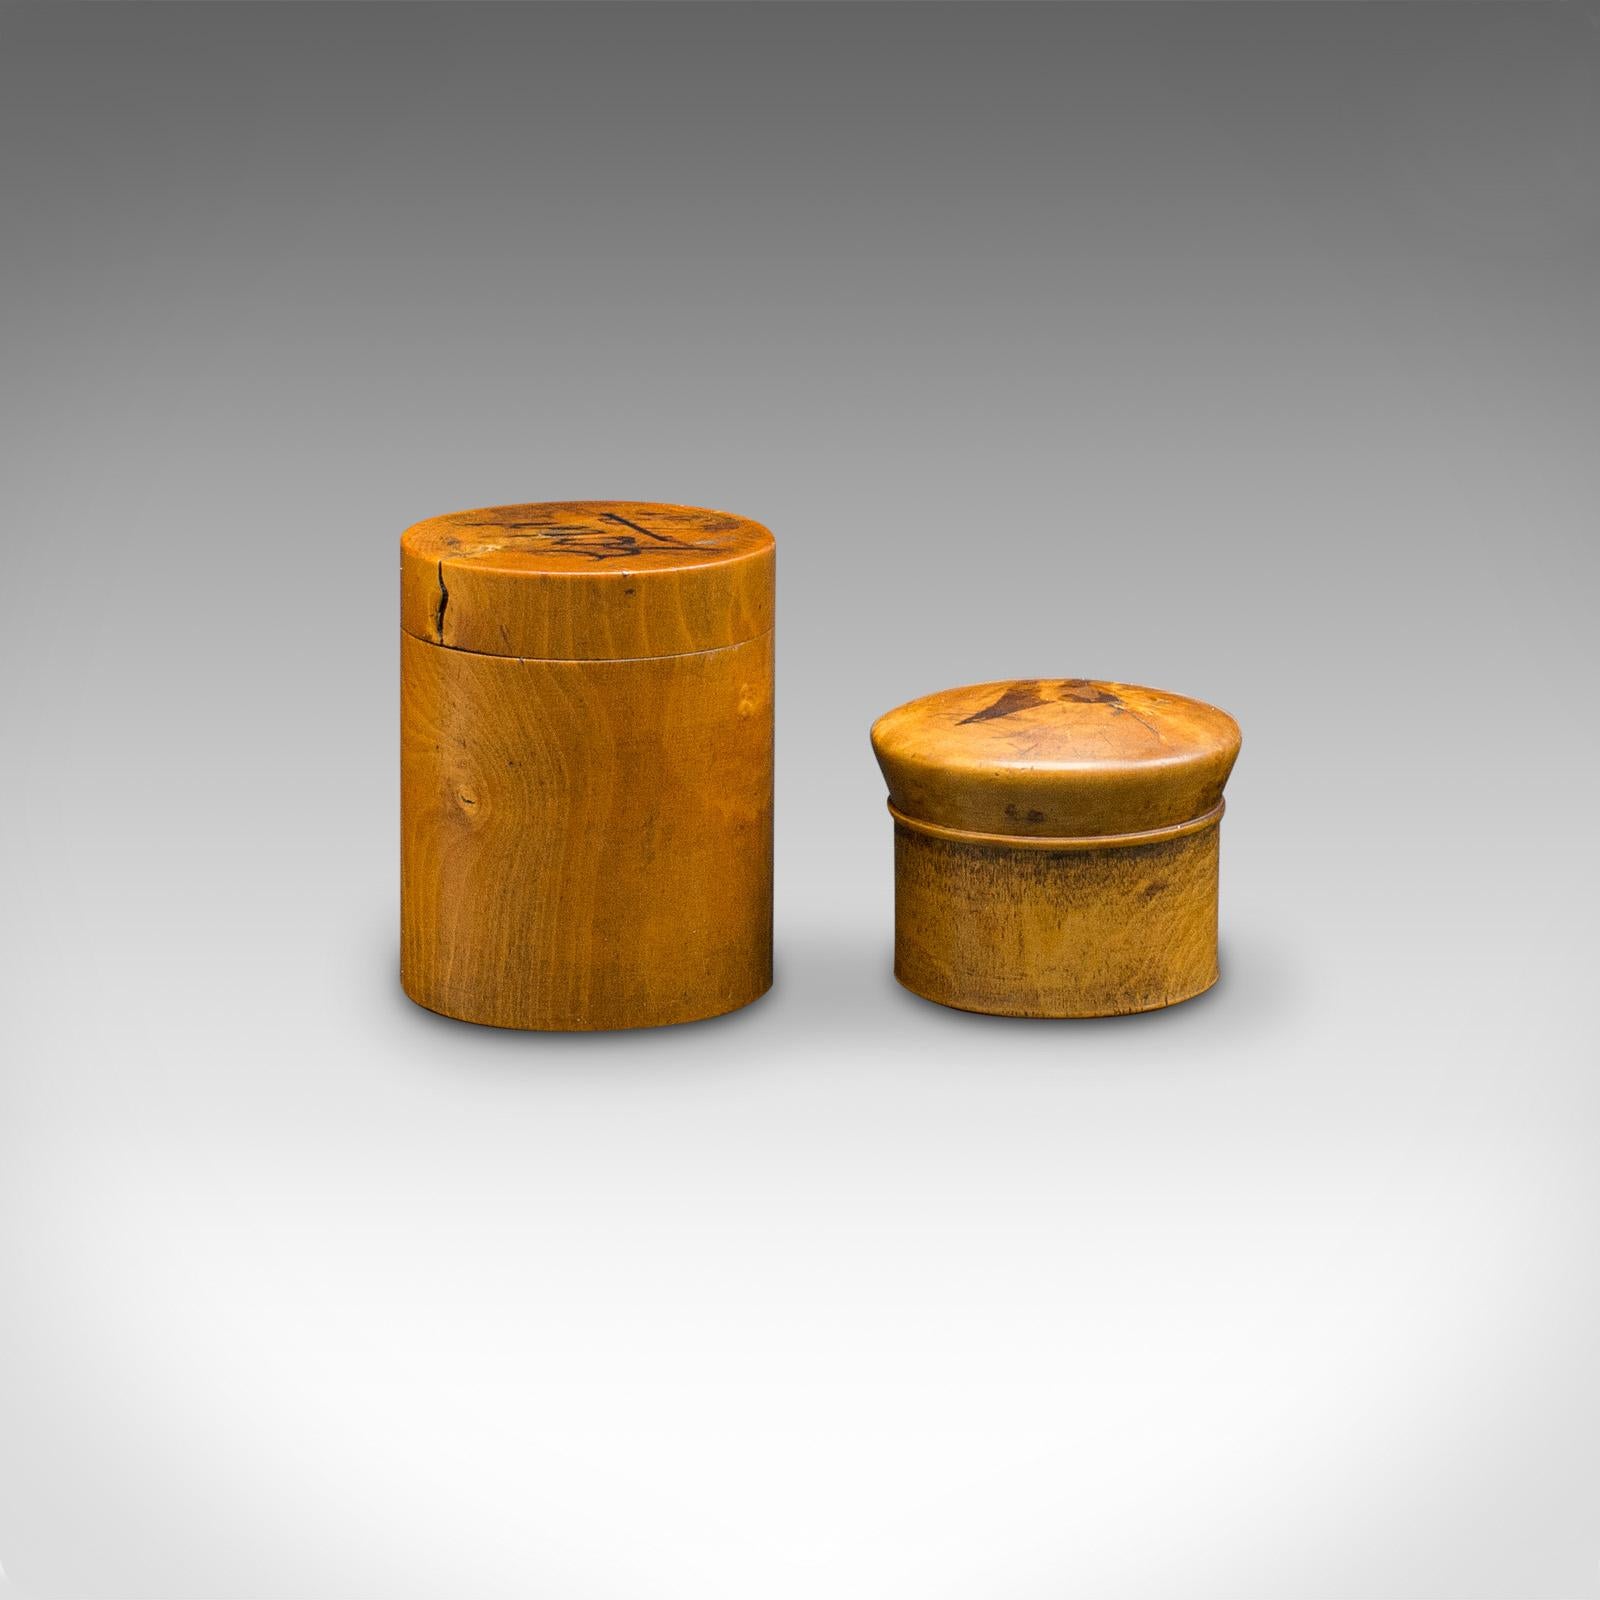 This is a set of two small antique apothecary boxes. An English, yew wood miniature treen, dating to the mid Victorian period, circa 1860.

Charmingly petite countertop chemist's pots
Displaying a desirable aged patina and in good original